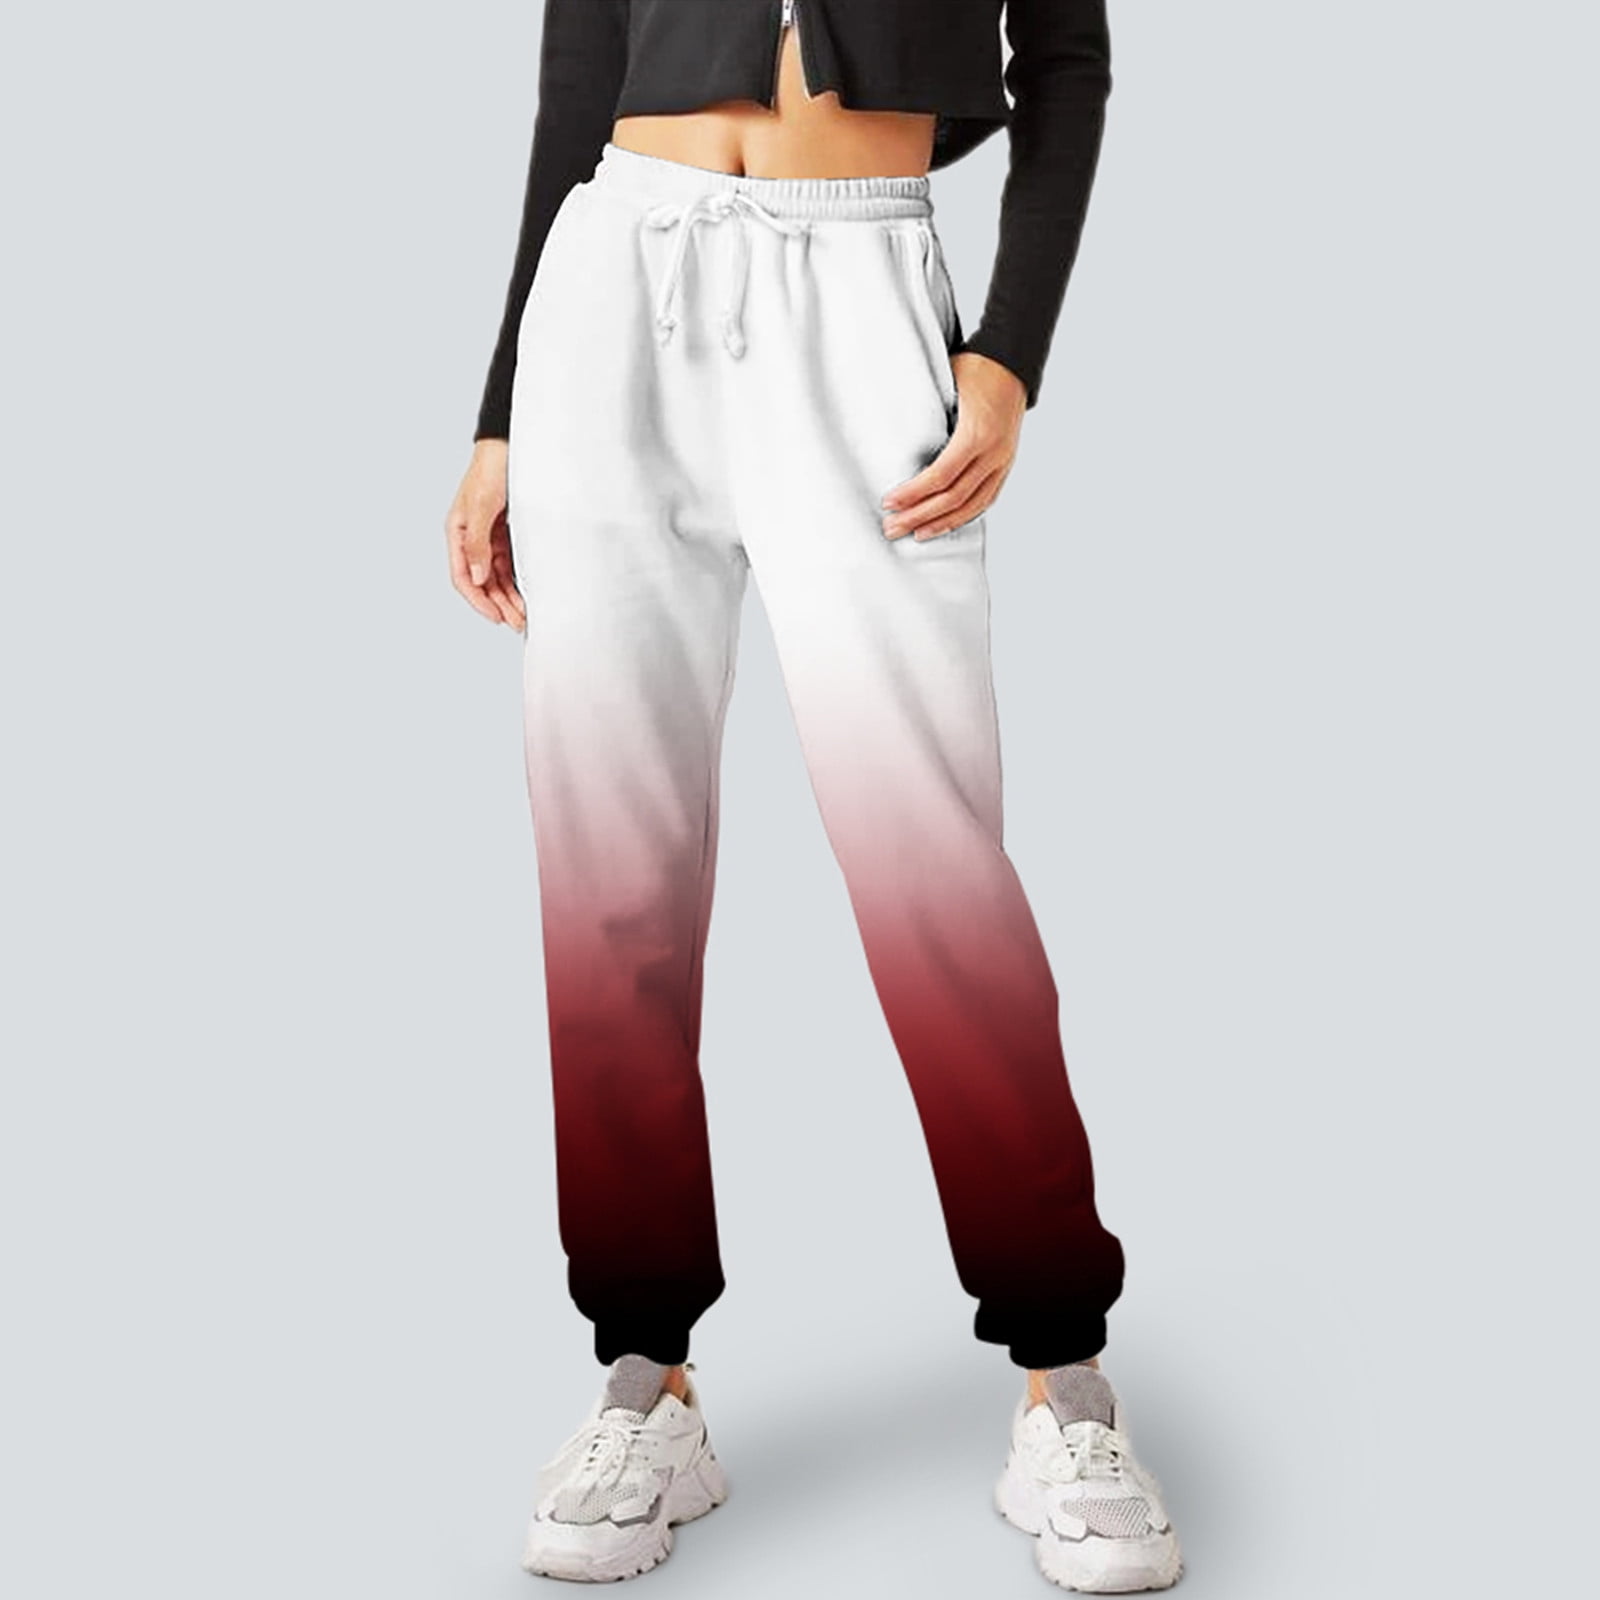 TOWED22 High Waisted Pants For Women,Women's Solid Sweatpants Drawstring  Jogger Sweat Pants Women Casual Fashion Independent Prints Bottom(White,L)  